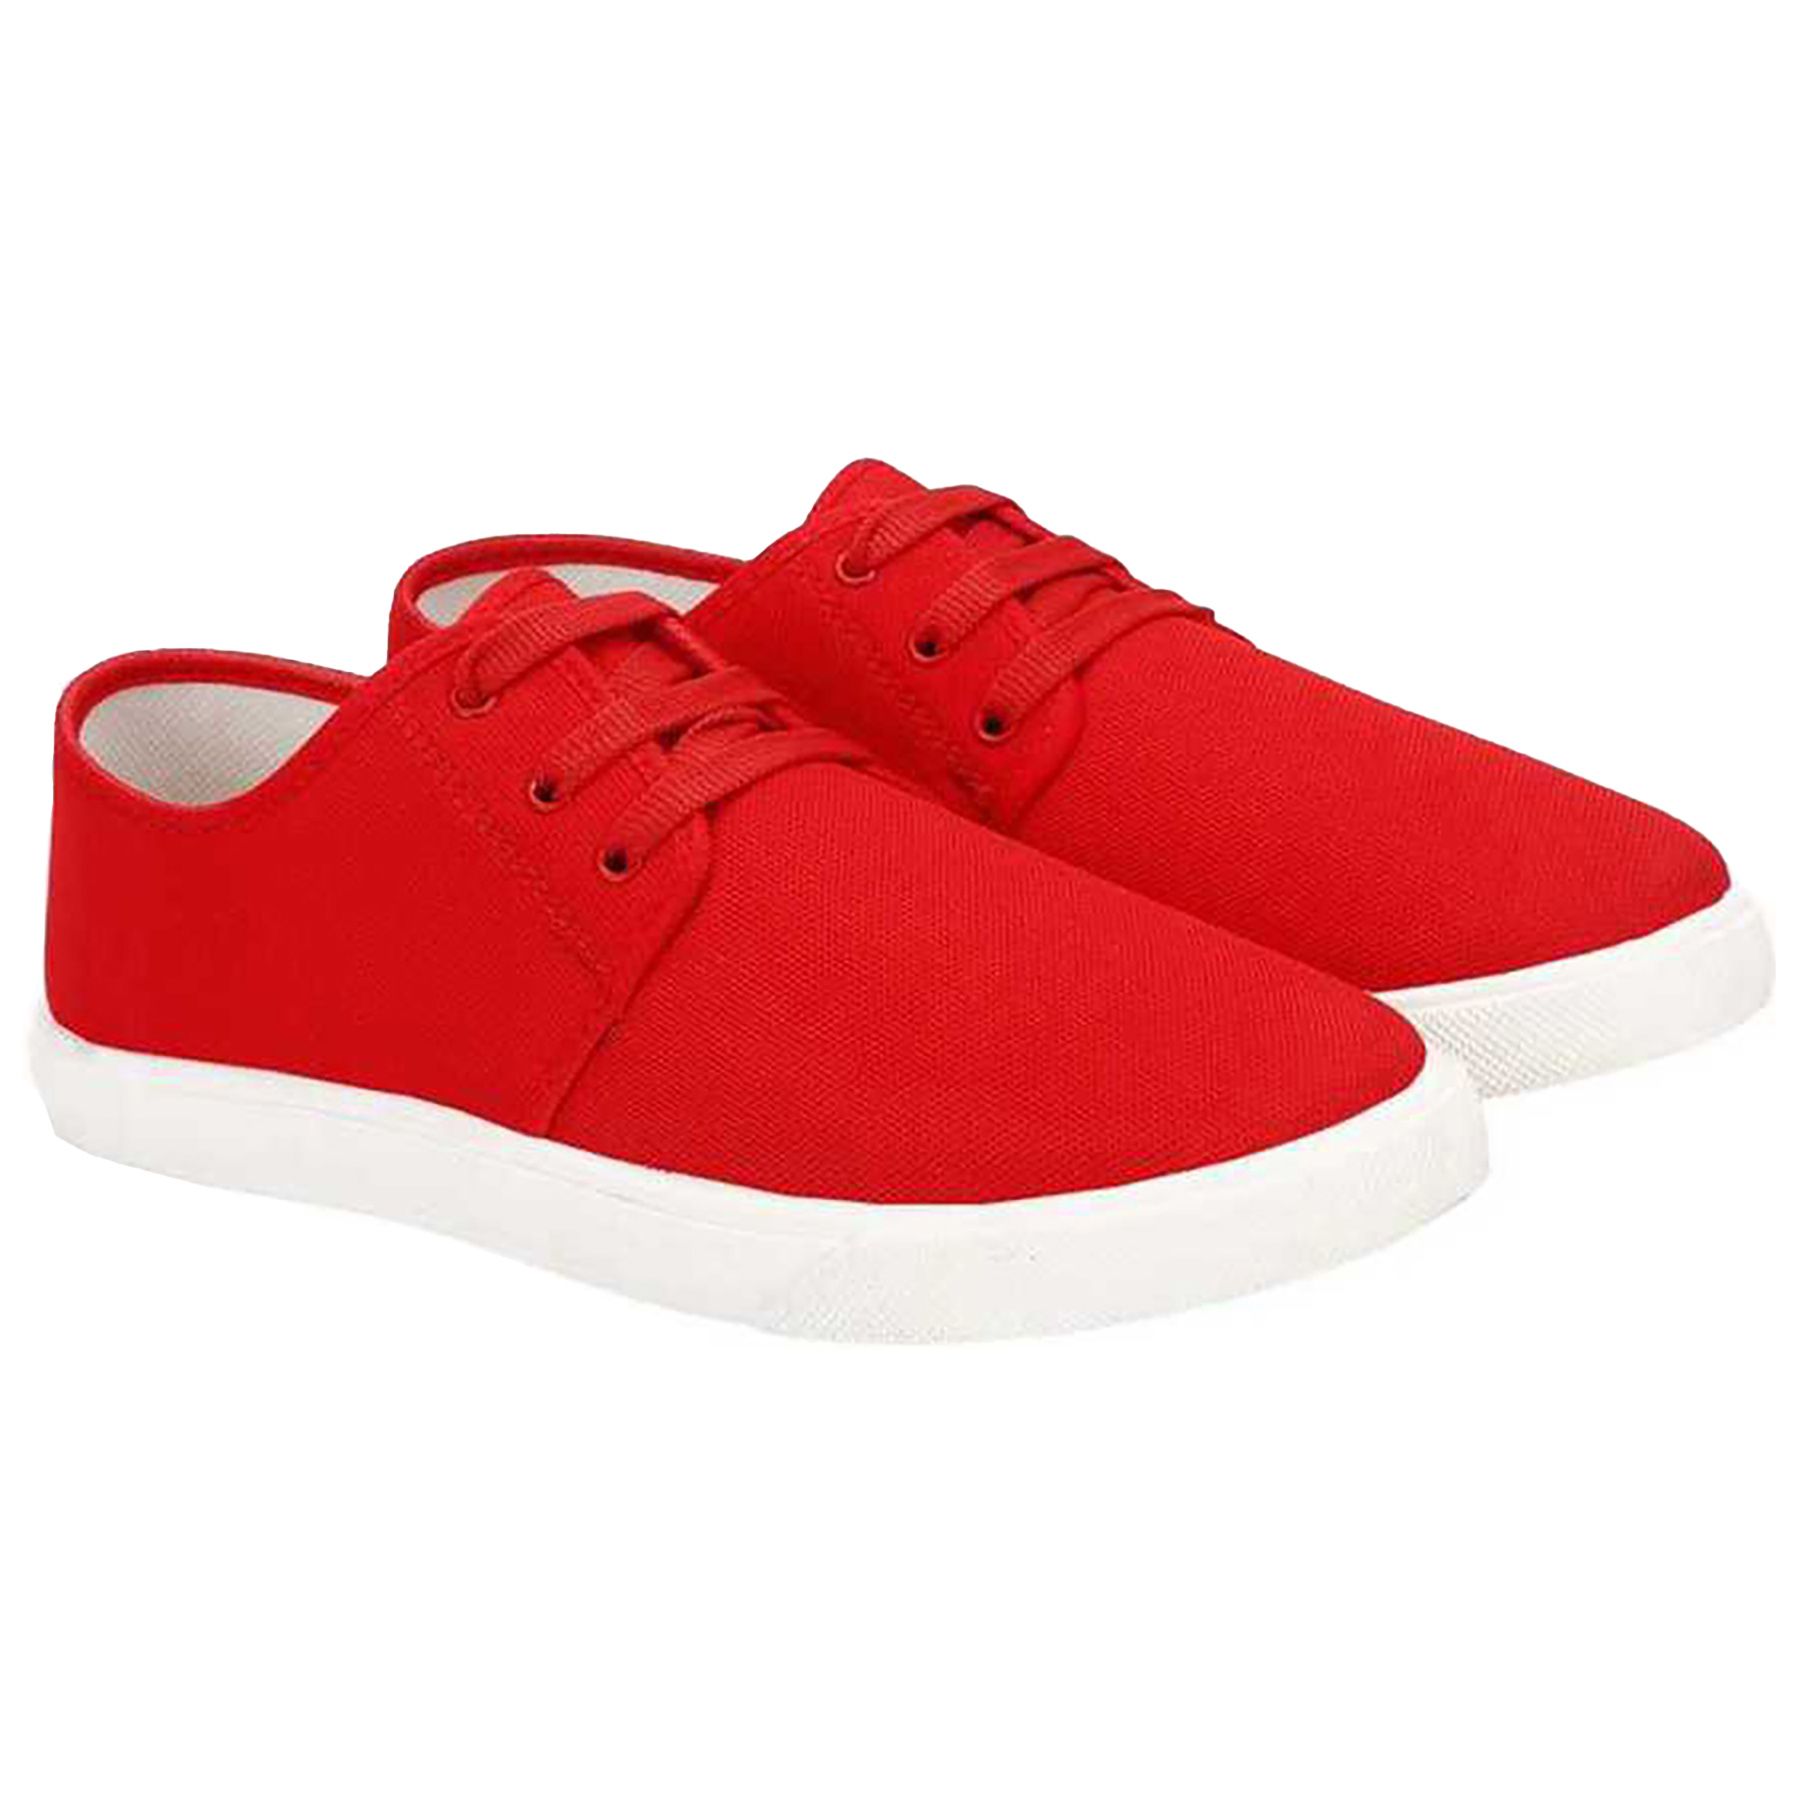     			Bruton Sneakers Casual Shoes for Men Red Men's Lifestyle